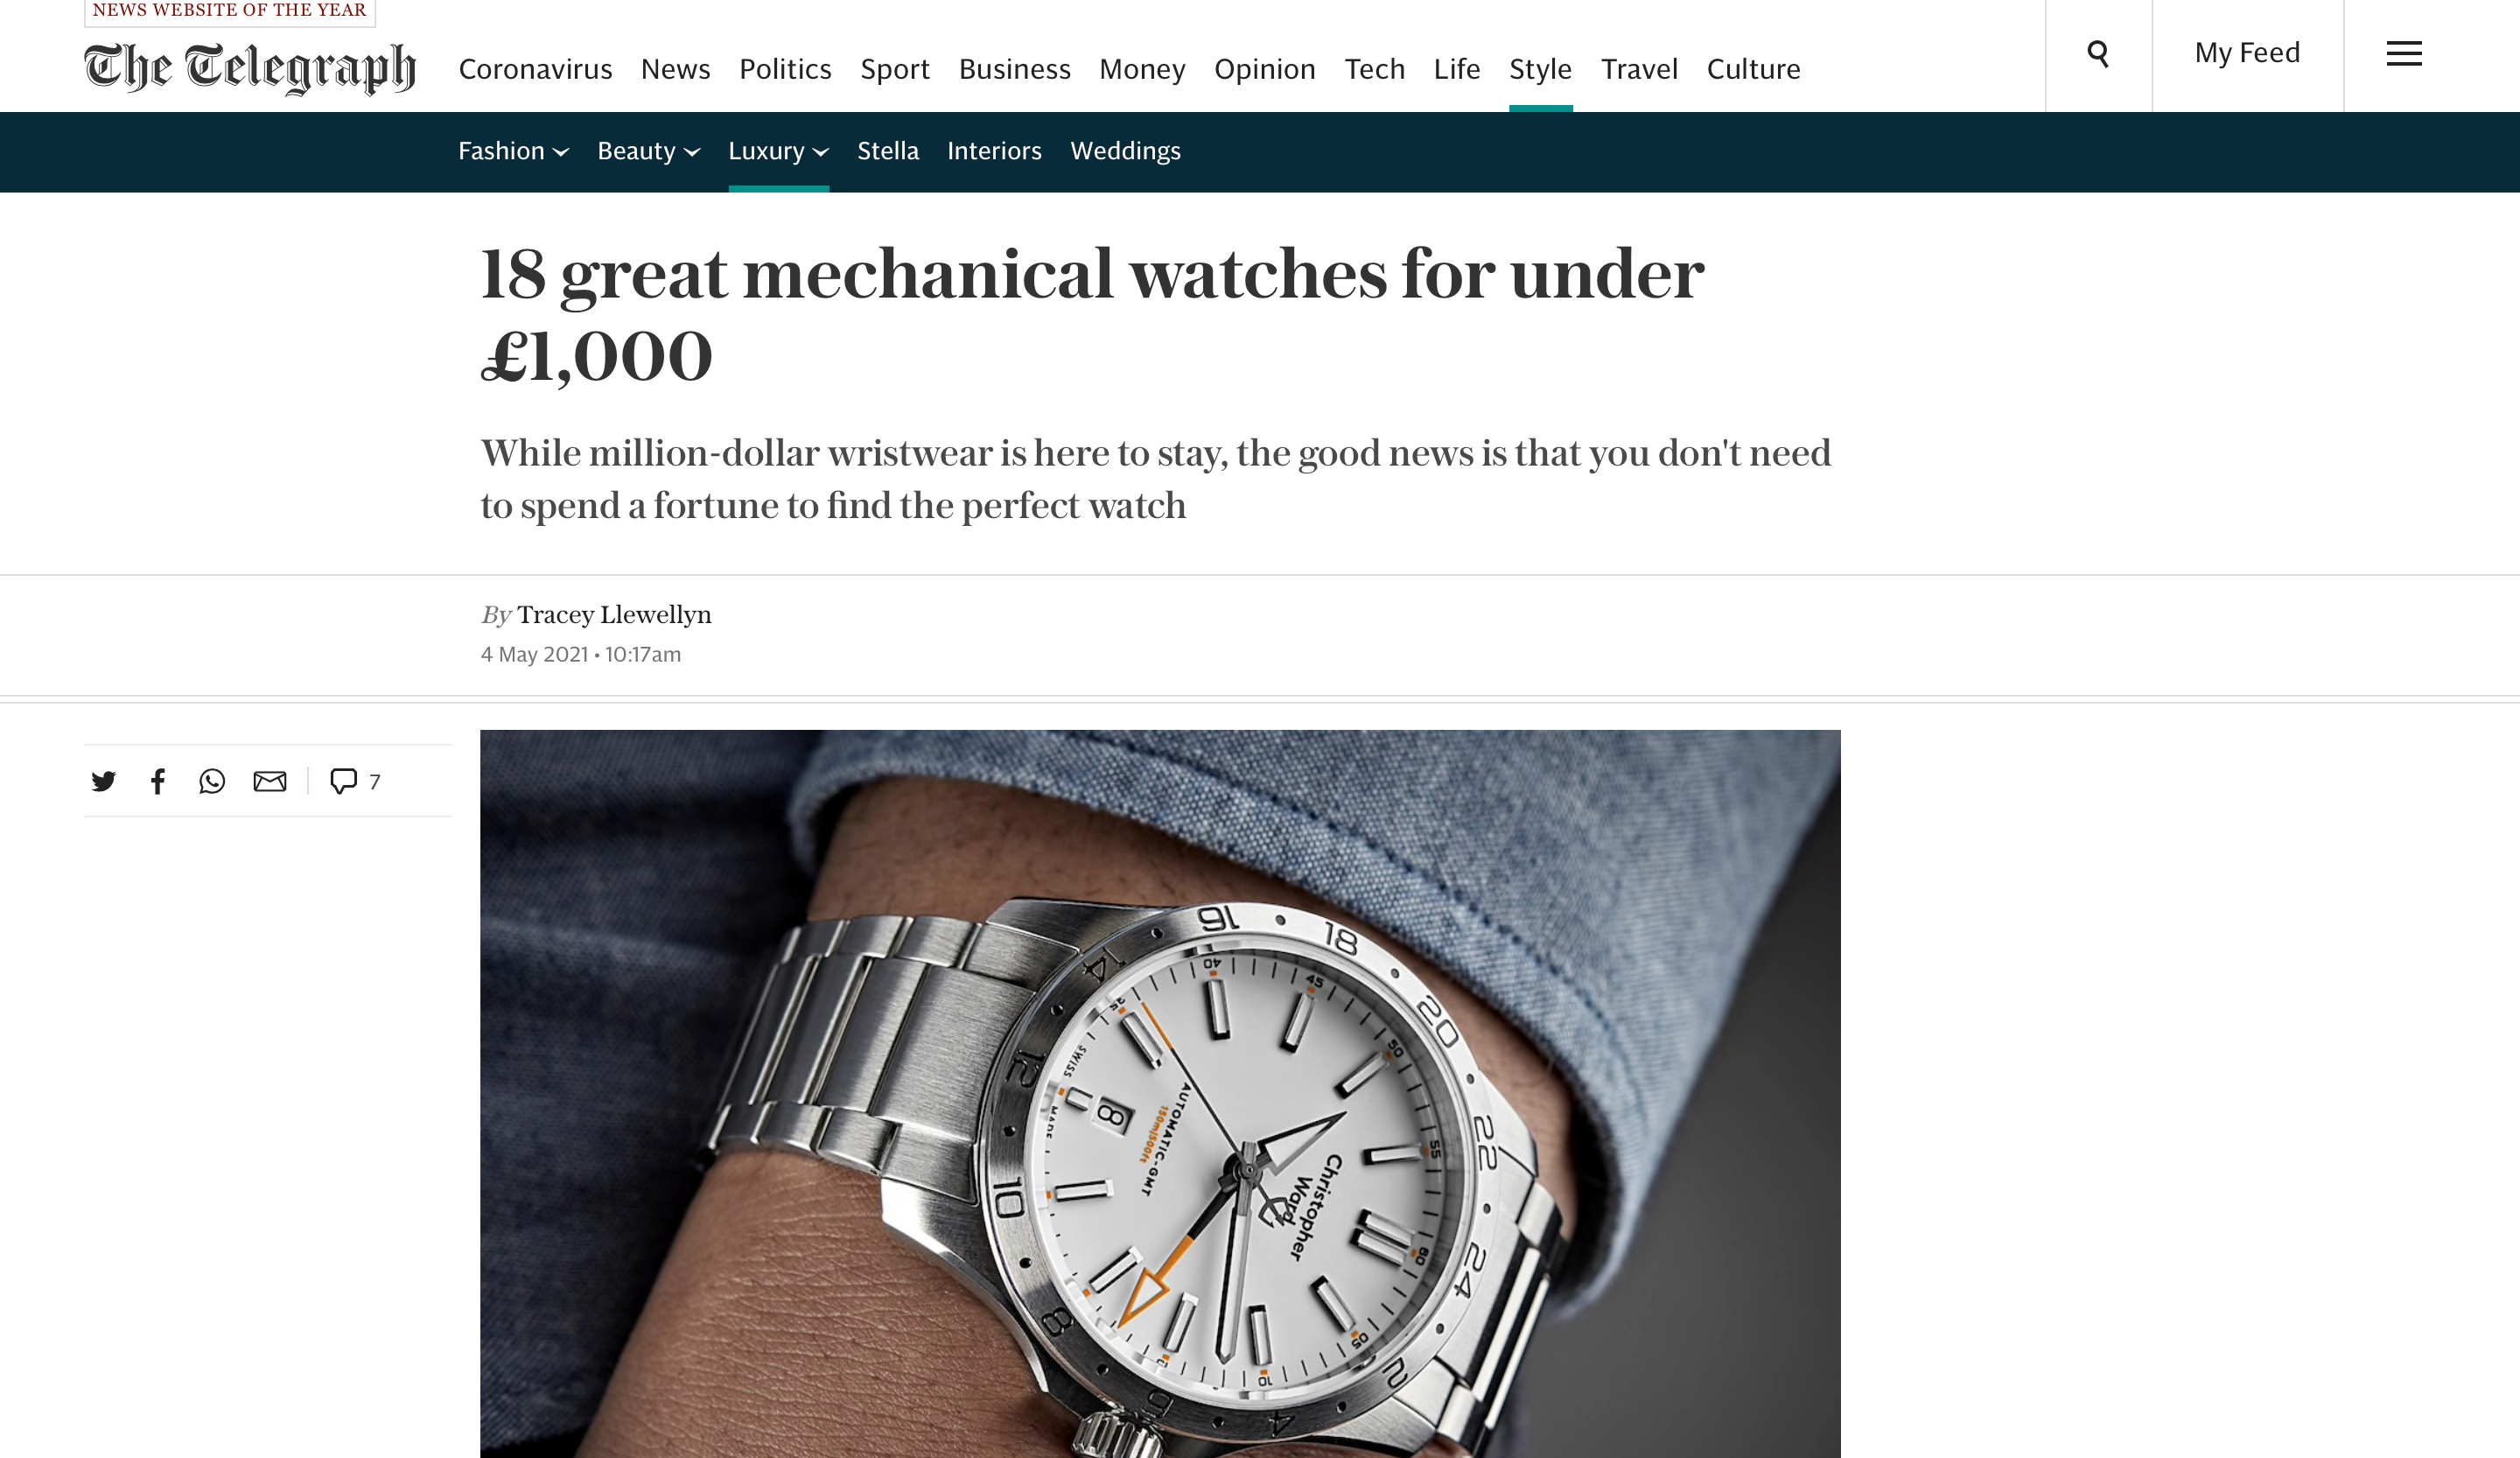 The Telegraph - 18 Great Mechanical Watches Under £1,000